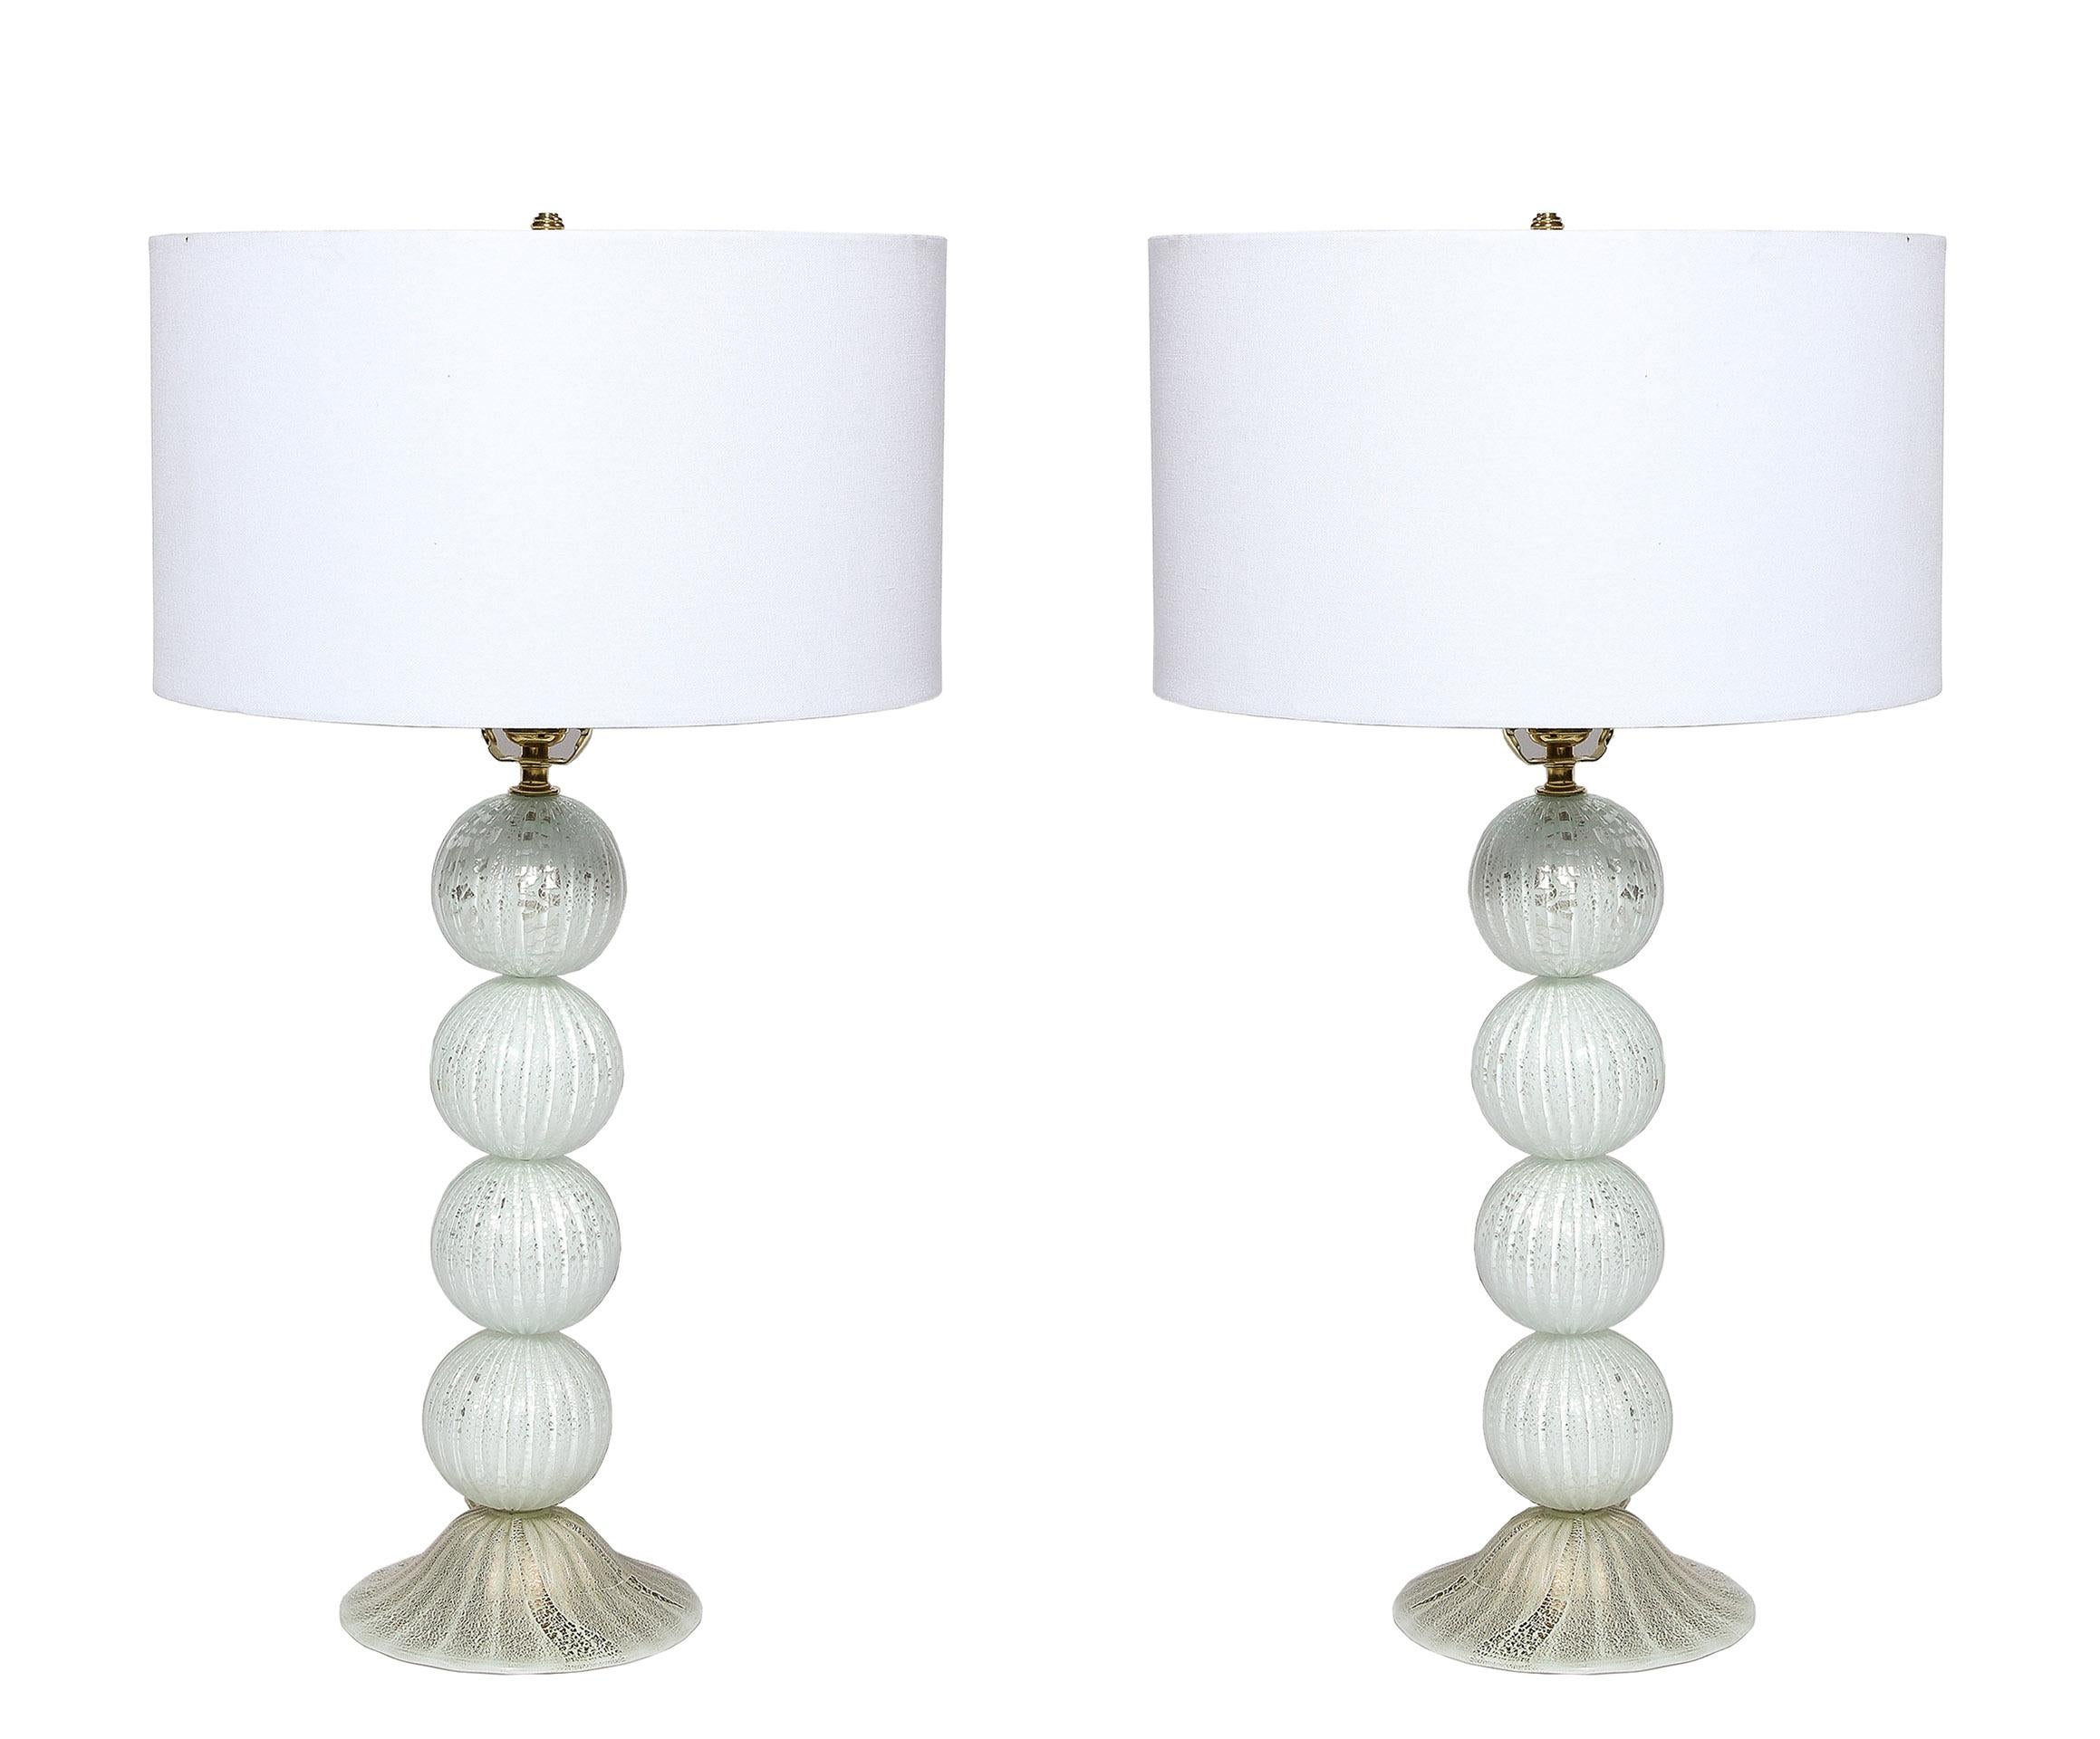 The pair of lamps comprised of stacked white and gilt handblown spheres on a conic base. 
They are newly wired to US standards.